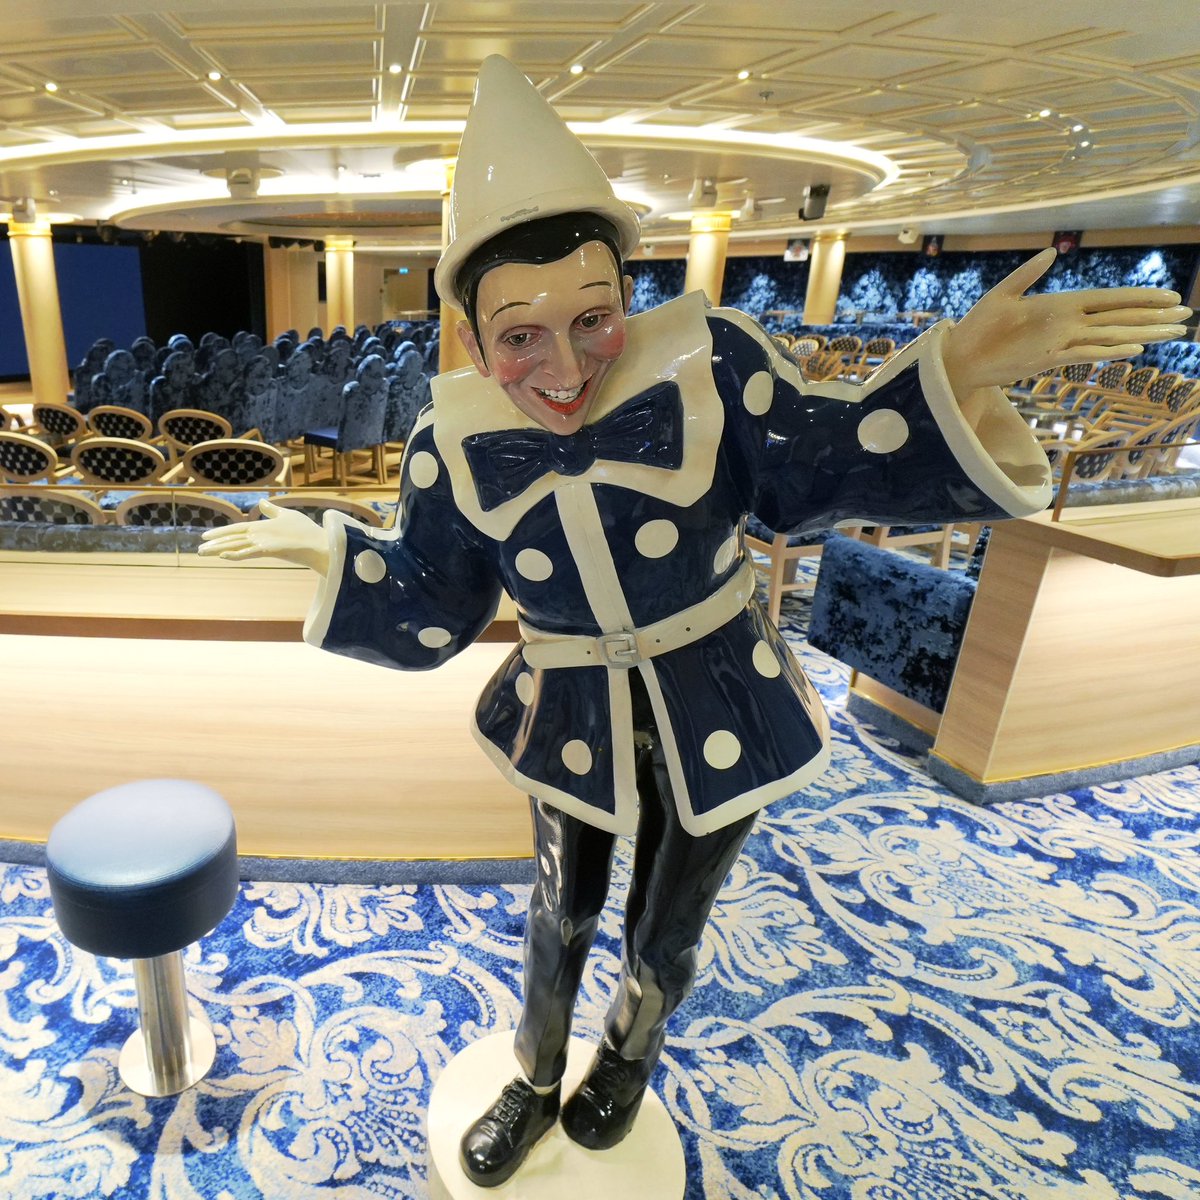 A jester awaits your arrival at Limelight Lounge for hilarious standup comedy sets on @CarnivalCruise #CarnivalFirenze #CarnivalFunItalianStyle #CruiseTravel #Cruise #Travel